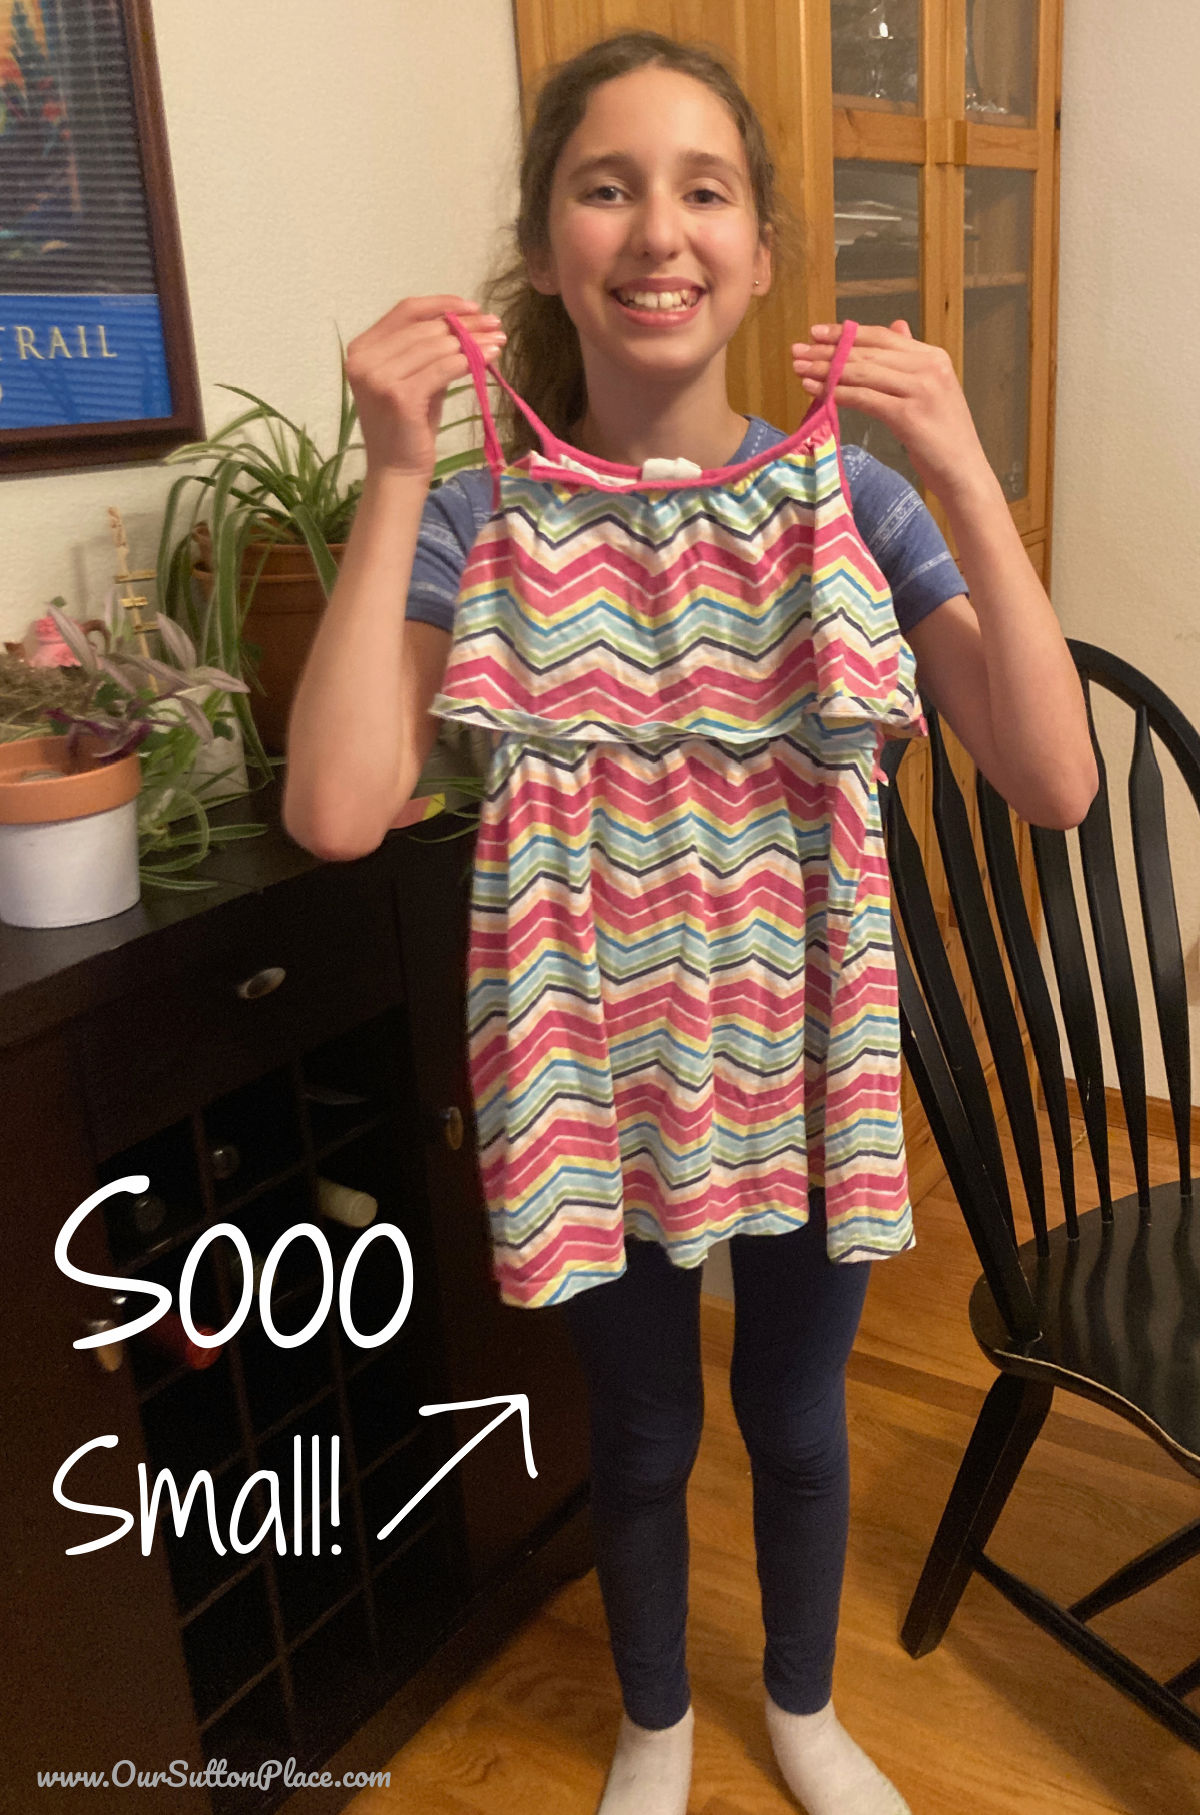 tween holding up old striped dress to upccyle